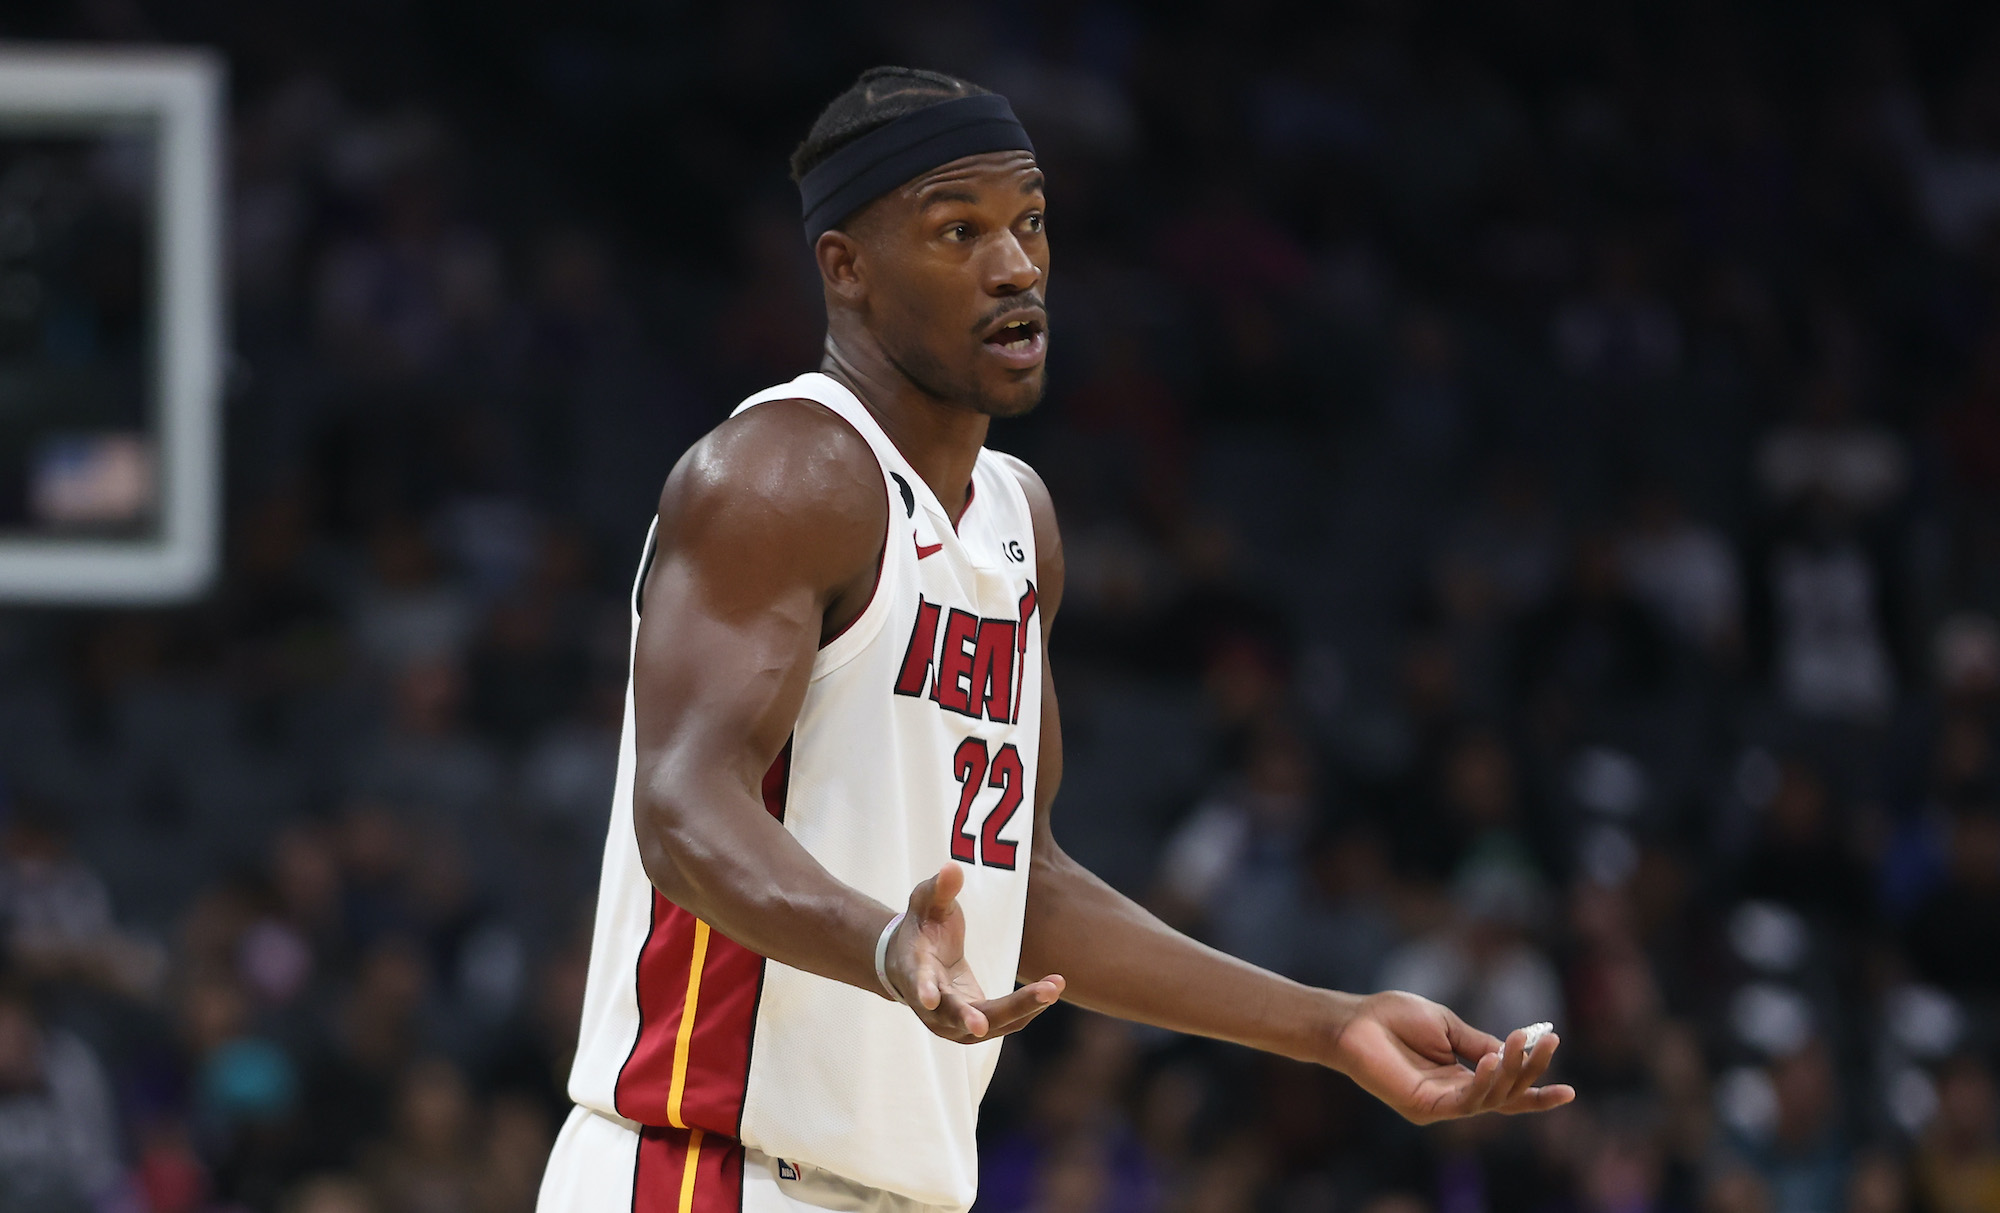 Jimmy Butler #22 of the Miami Heat looks on in the fourth quarter against the Sacramento Kings at Golden 1 Center on October 29, 2022 in Sacramento, California.